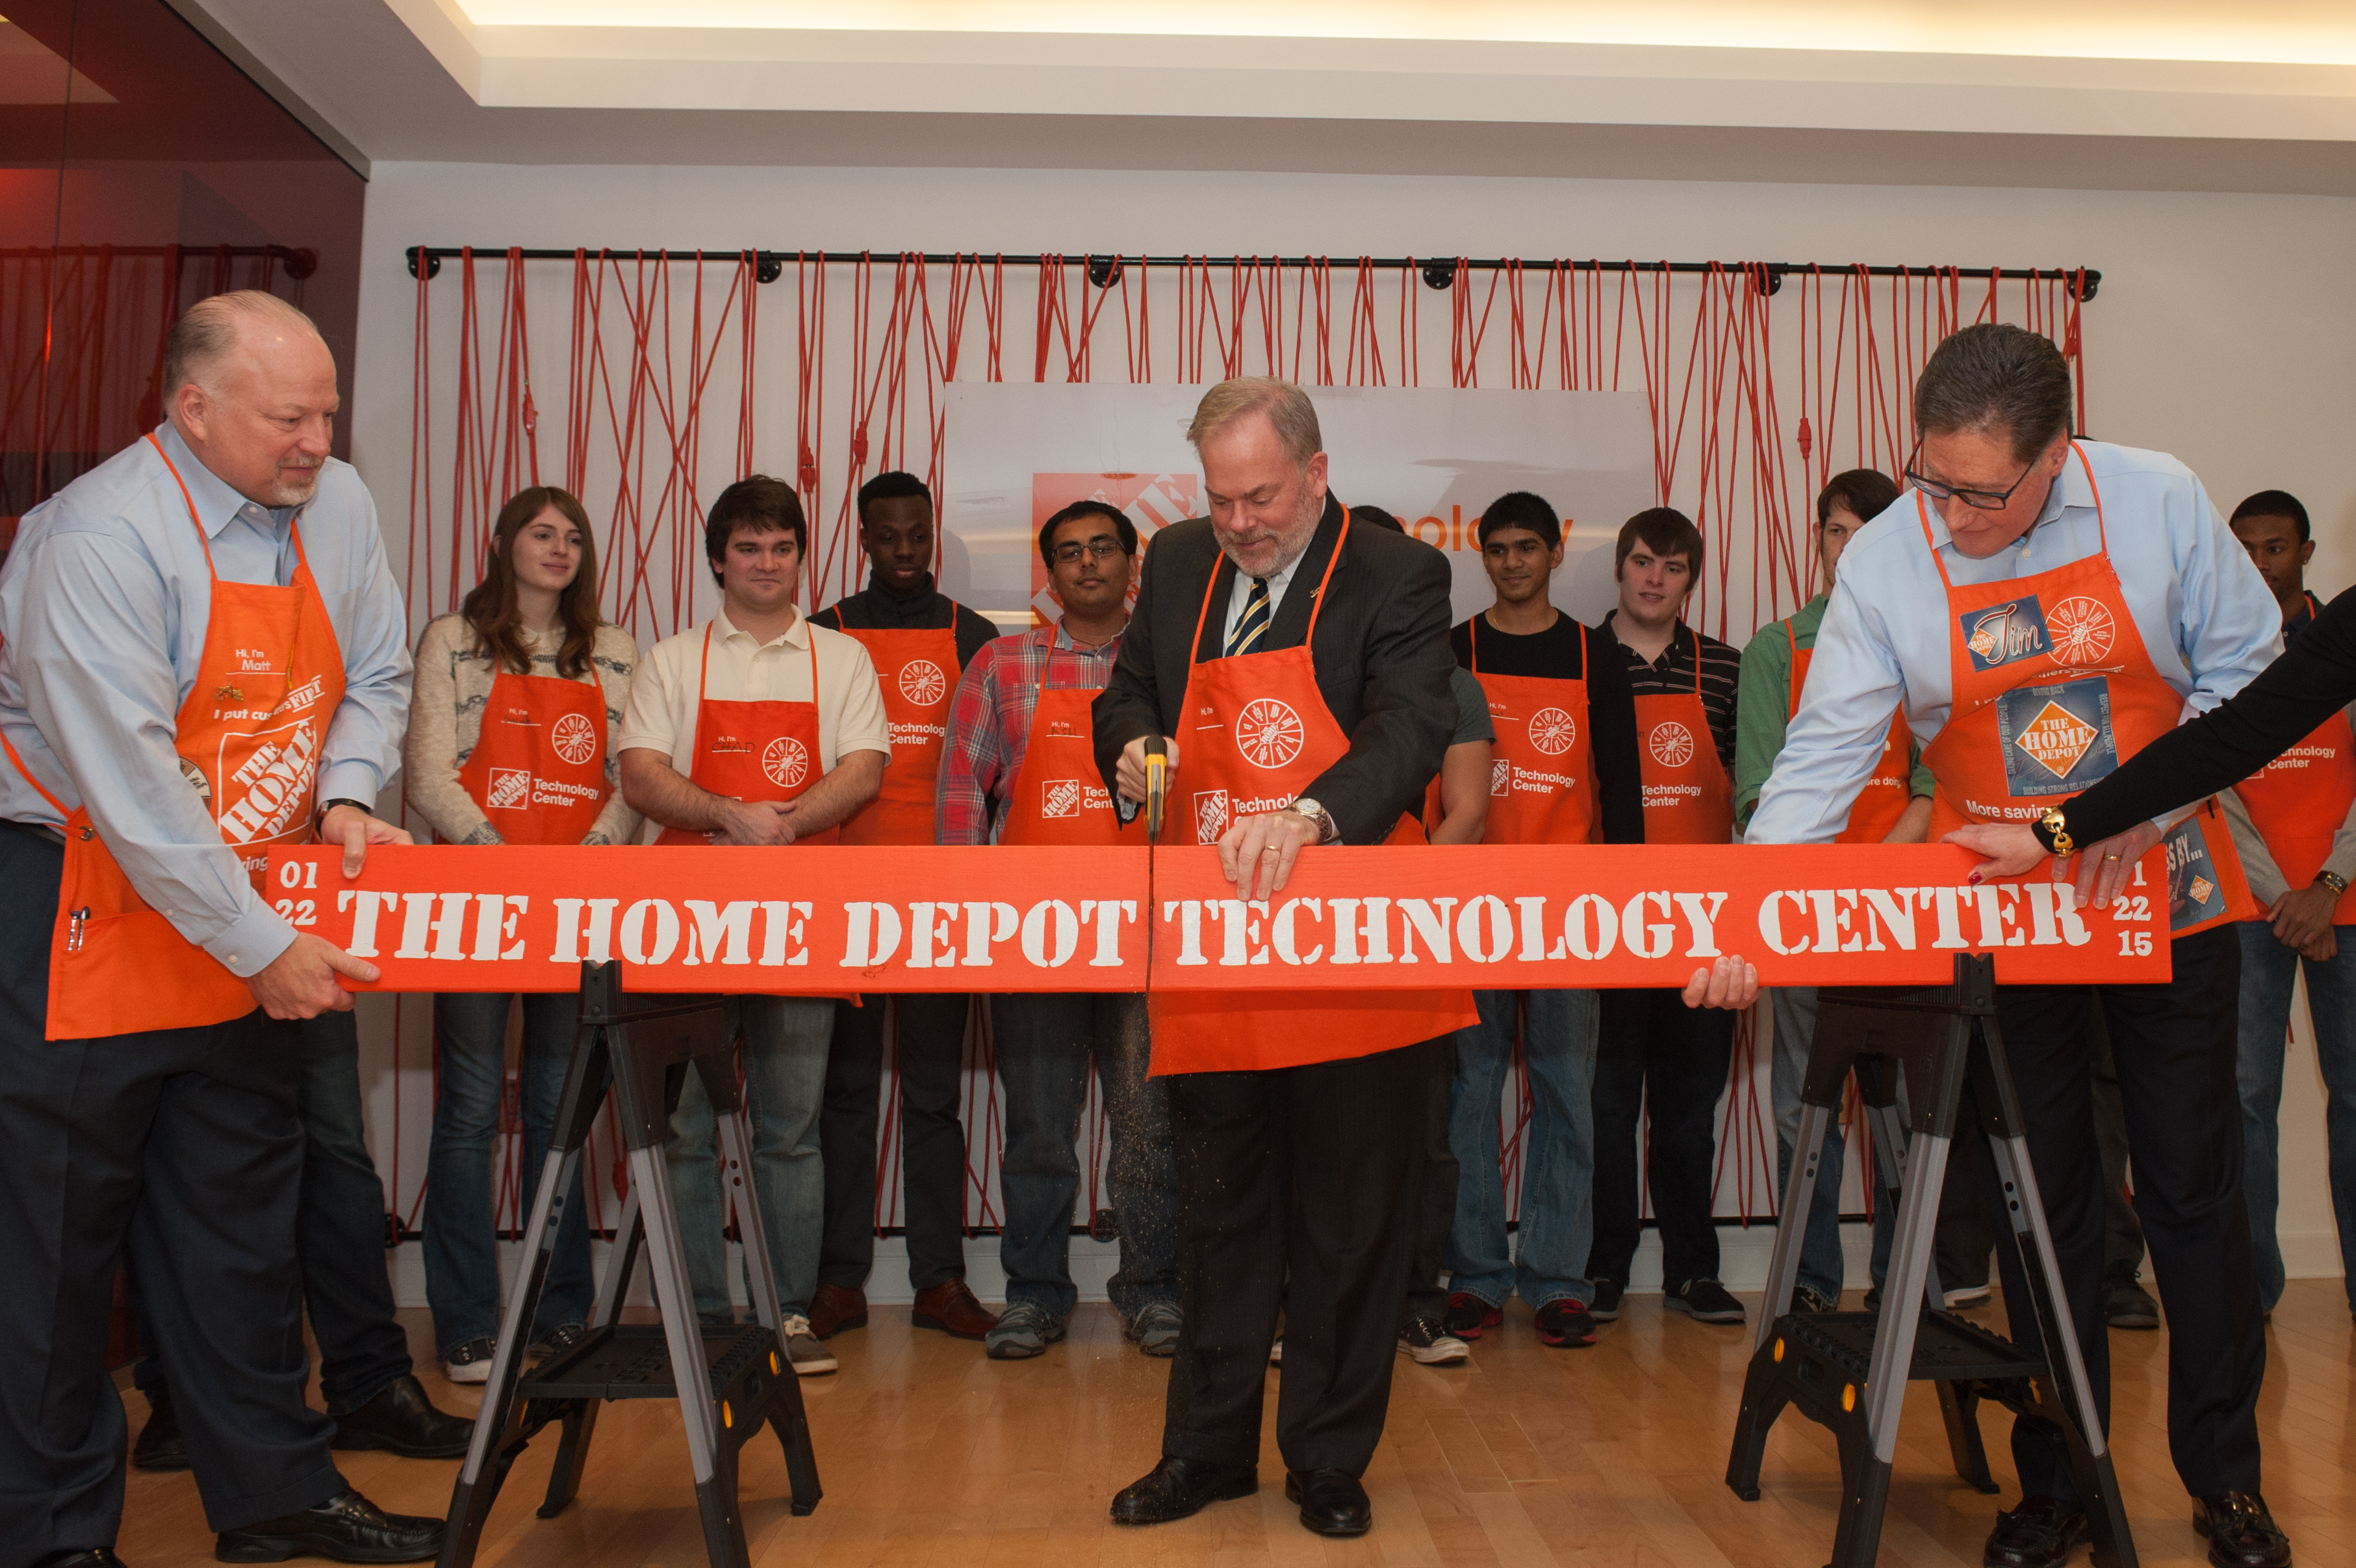 Georgia Tech Executive Vice President for Research Stephen E. Cross participates in the "Board Cutting Ceremony" that officially opens The Home Depot Technology Center in Tech Square.